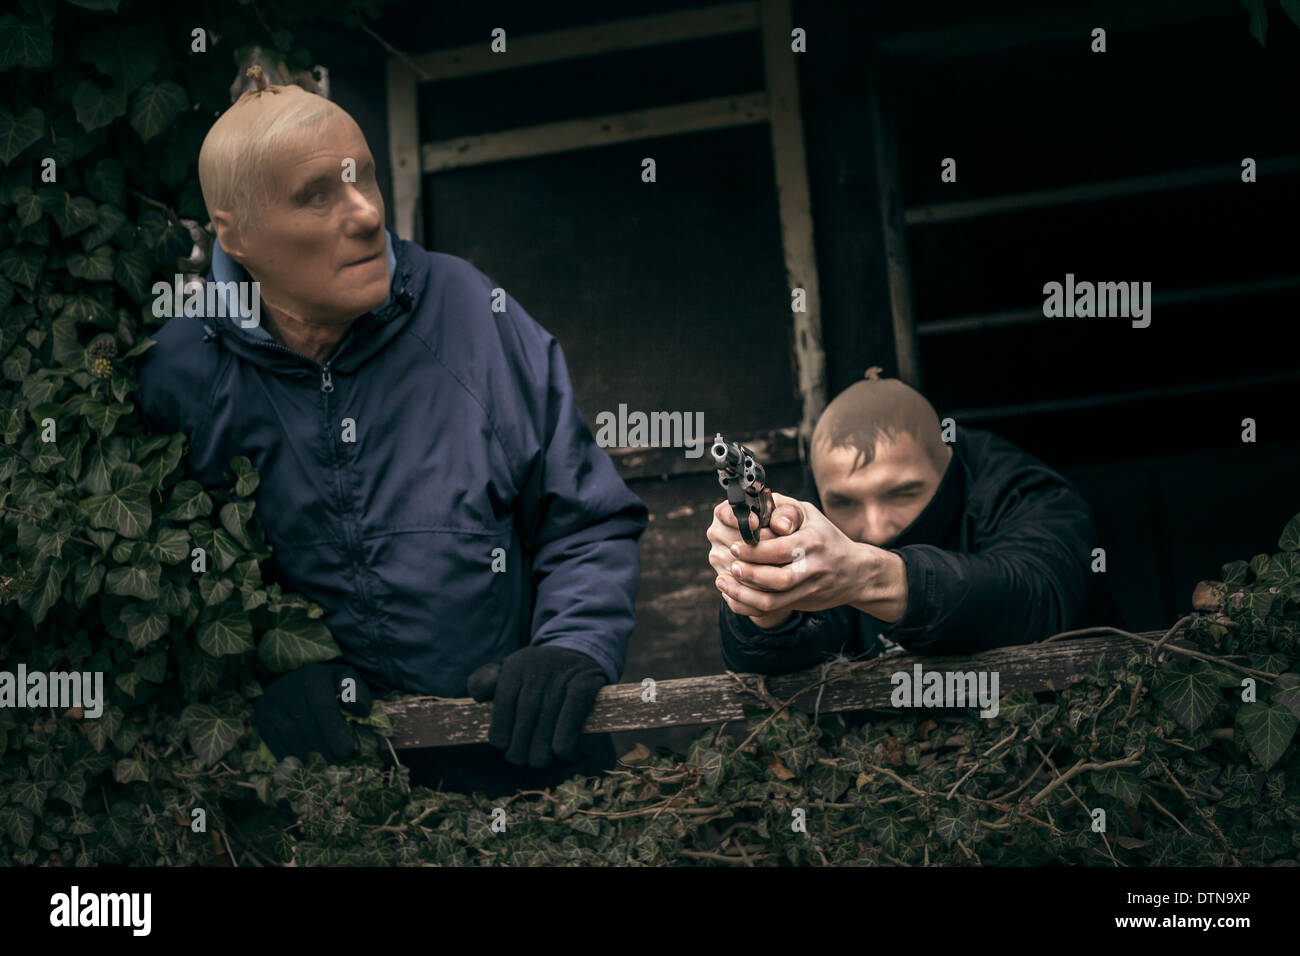 Two masked armed men hiding on overgrown porch of old cabin. Stock Photo